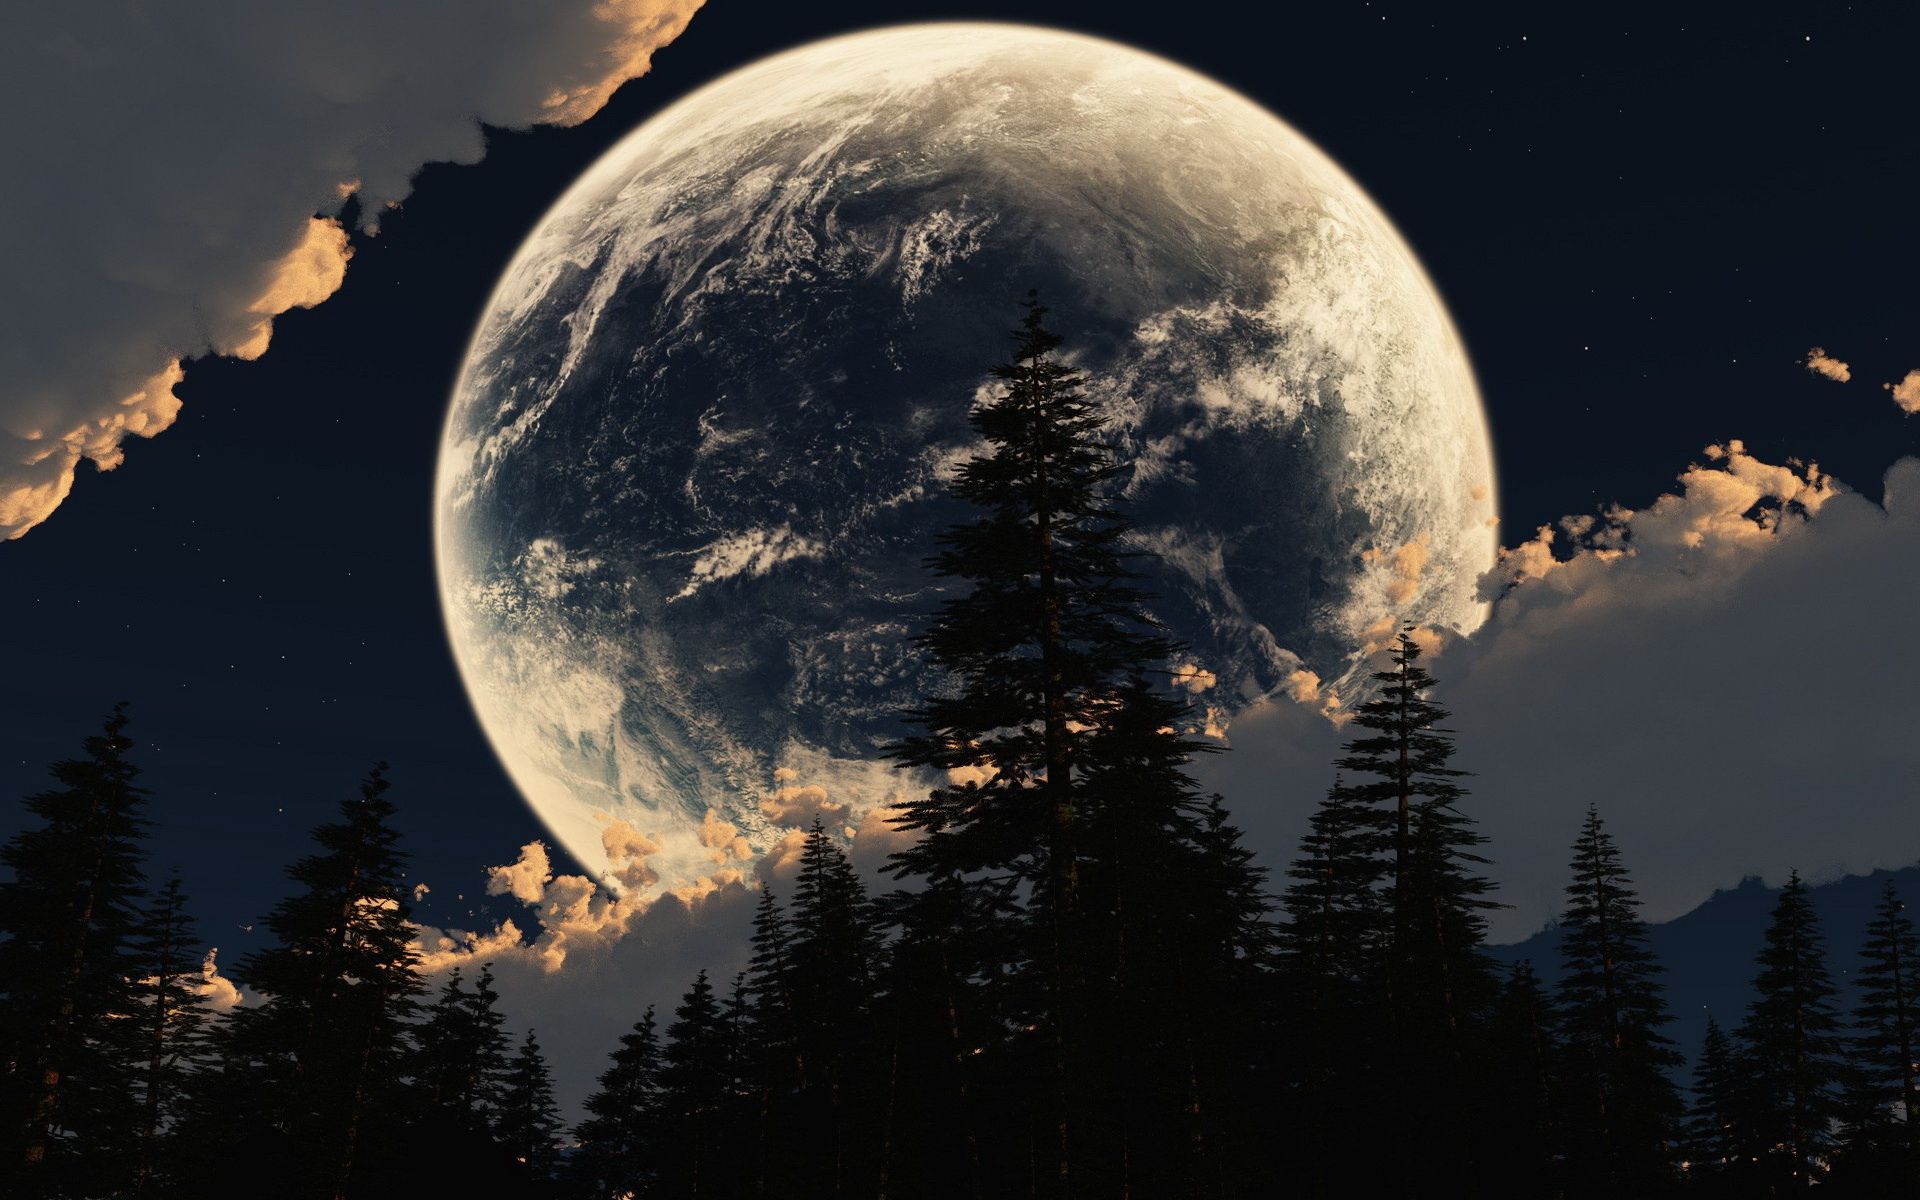 cg, Digital art, Manipulations, Space, Sci fi, Planets, Moon, Skies, Clouds, Scenic, Trees, Forest, Night, Lights, Surreal Wallpaper